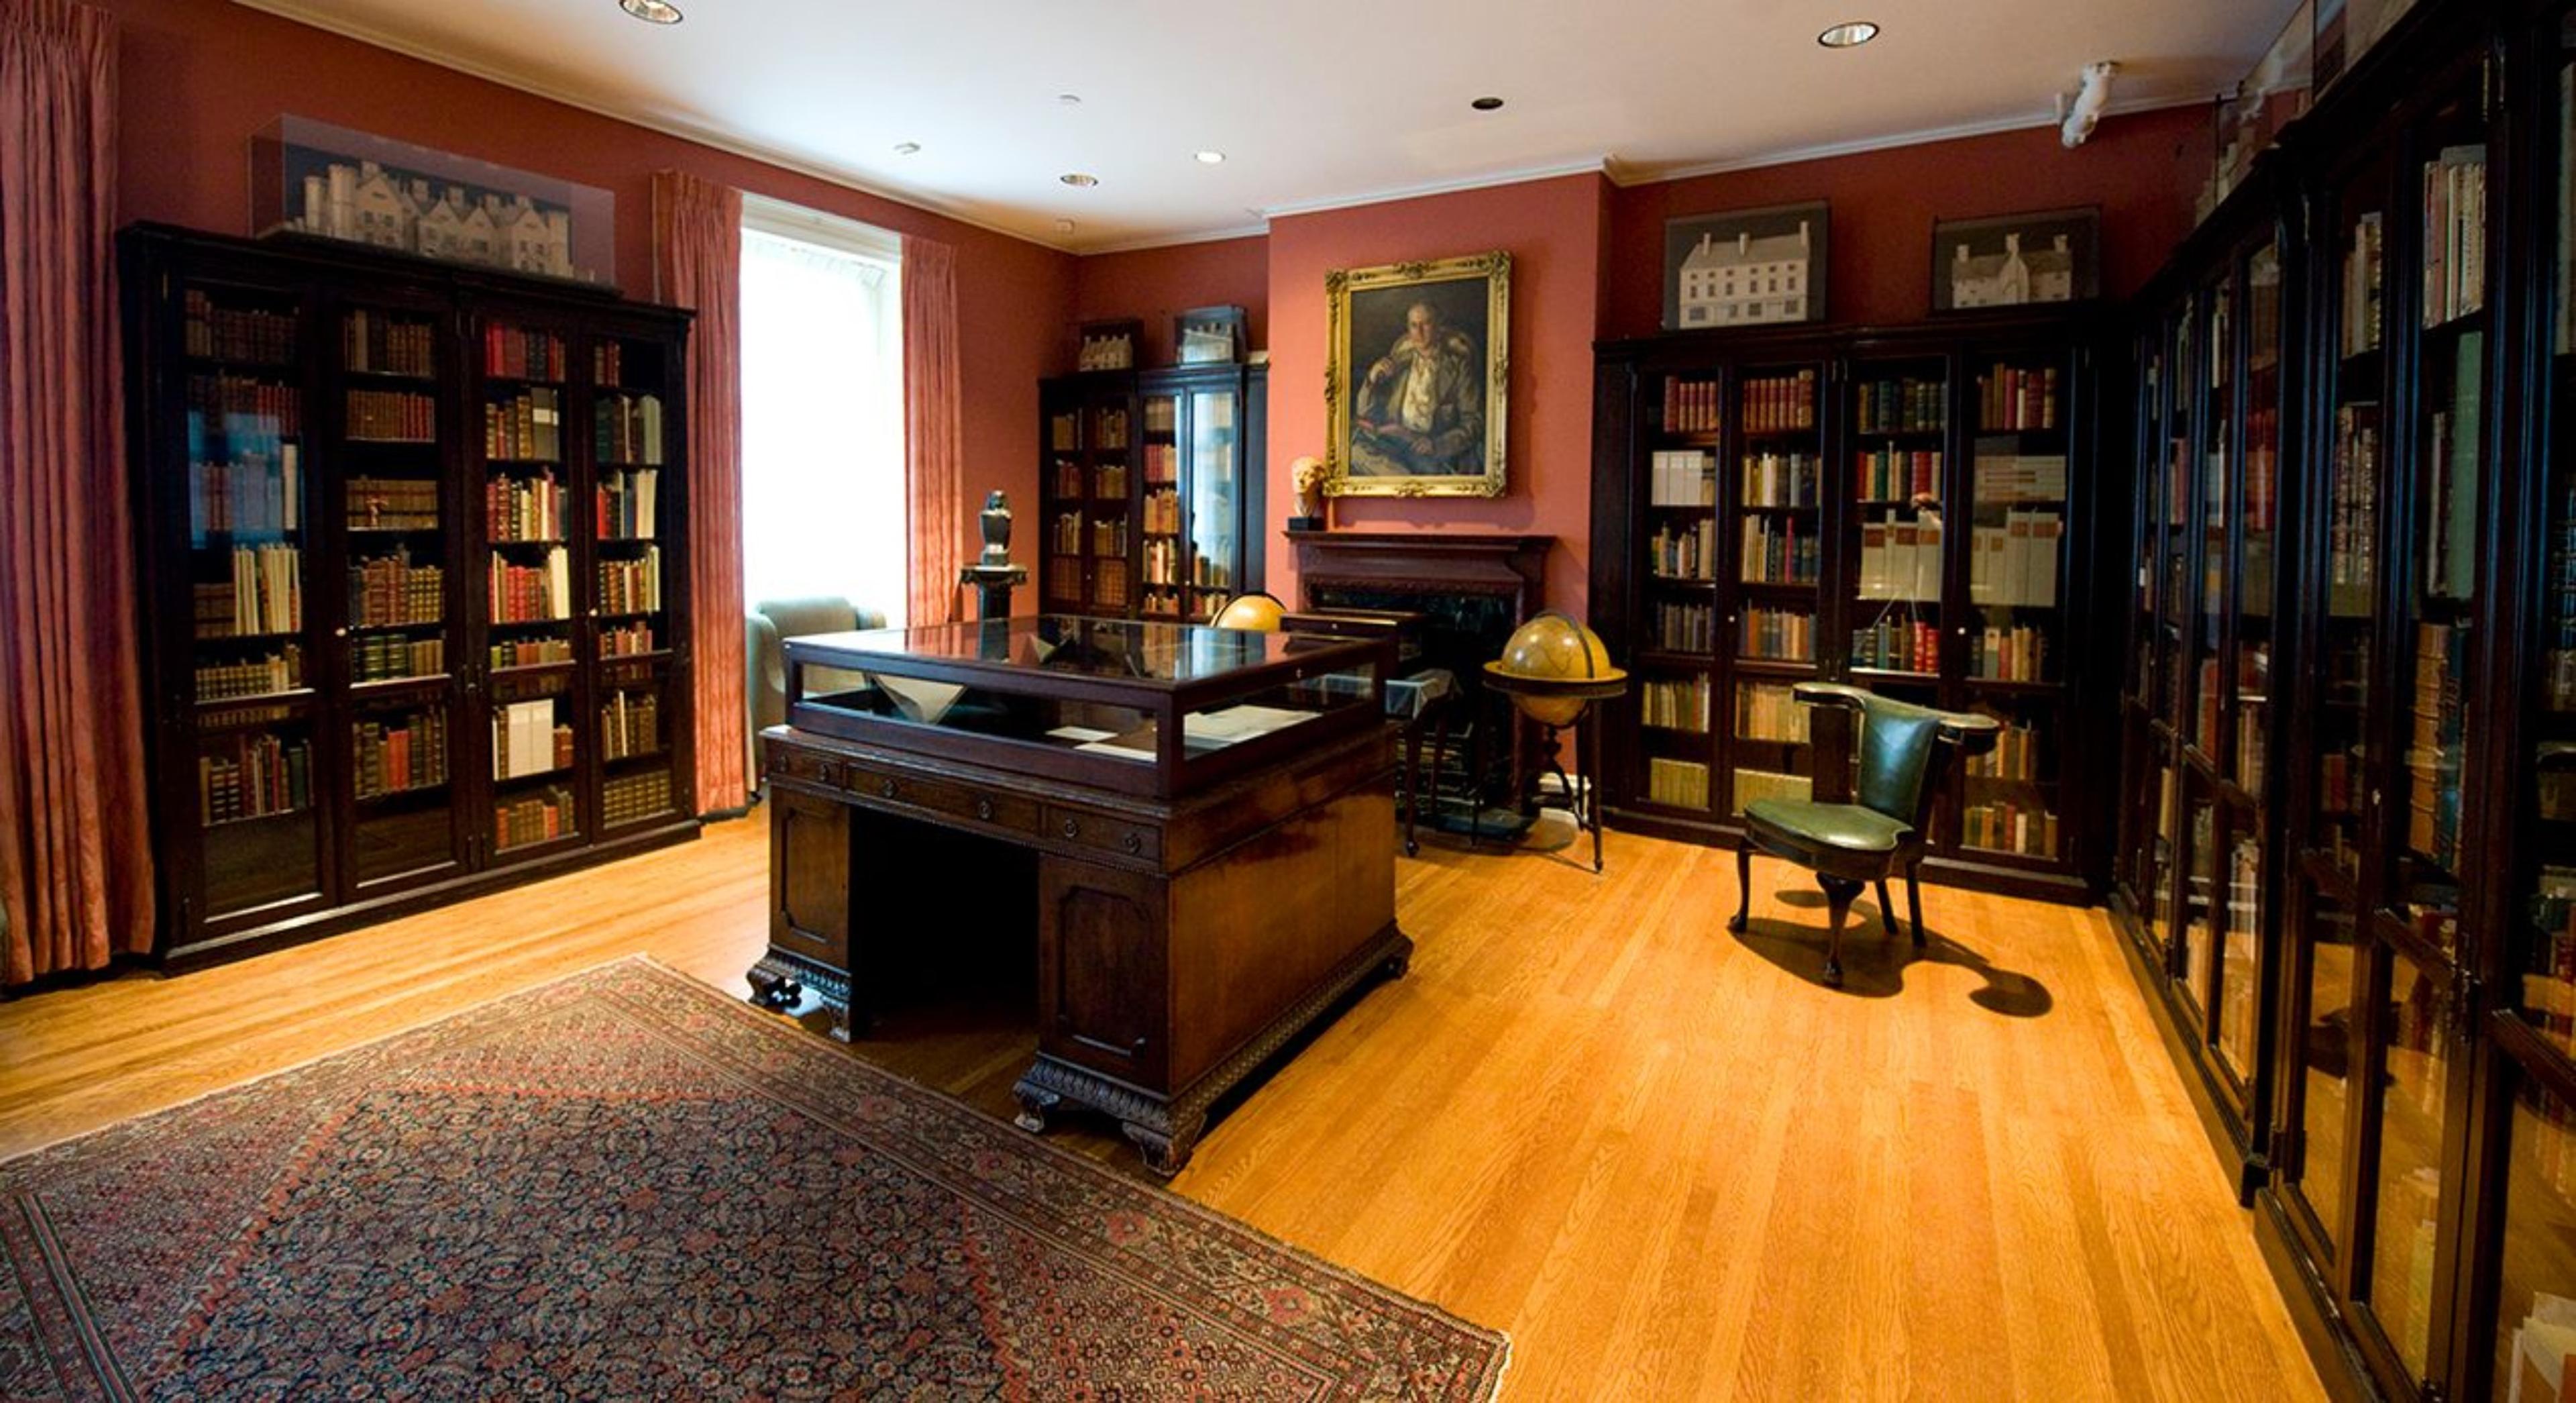 The Rosenbach Museum & Library